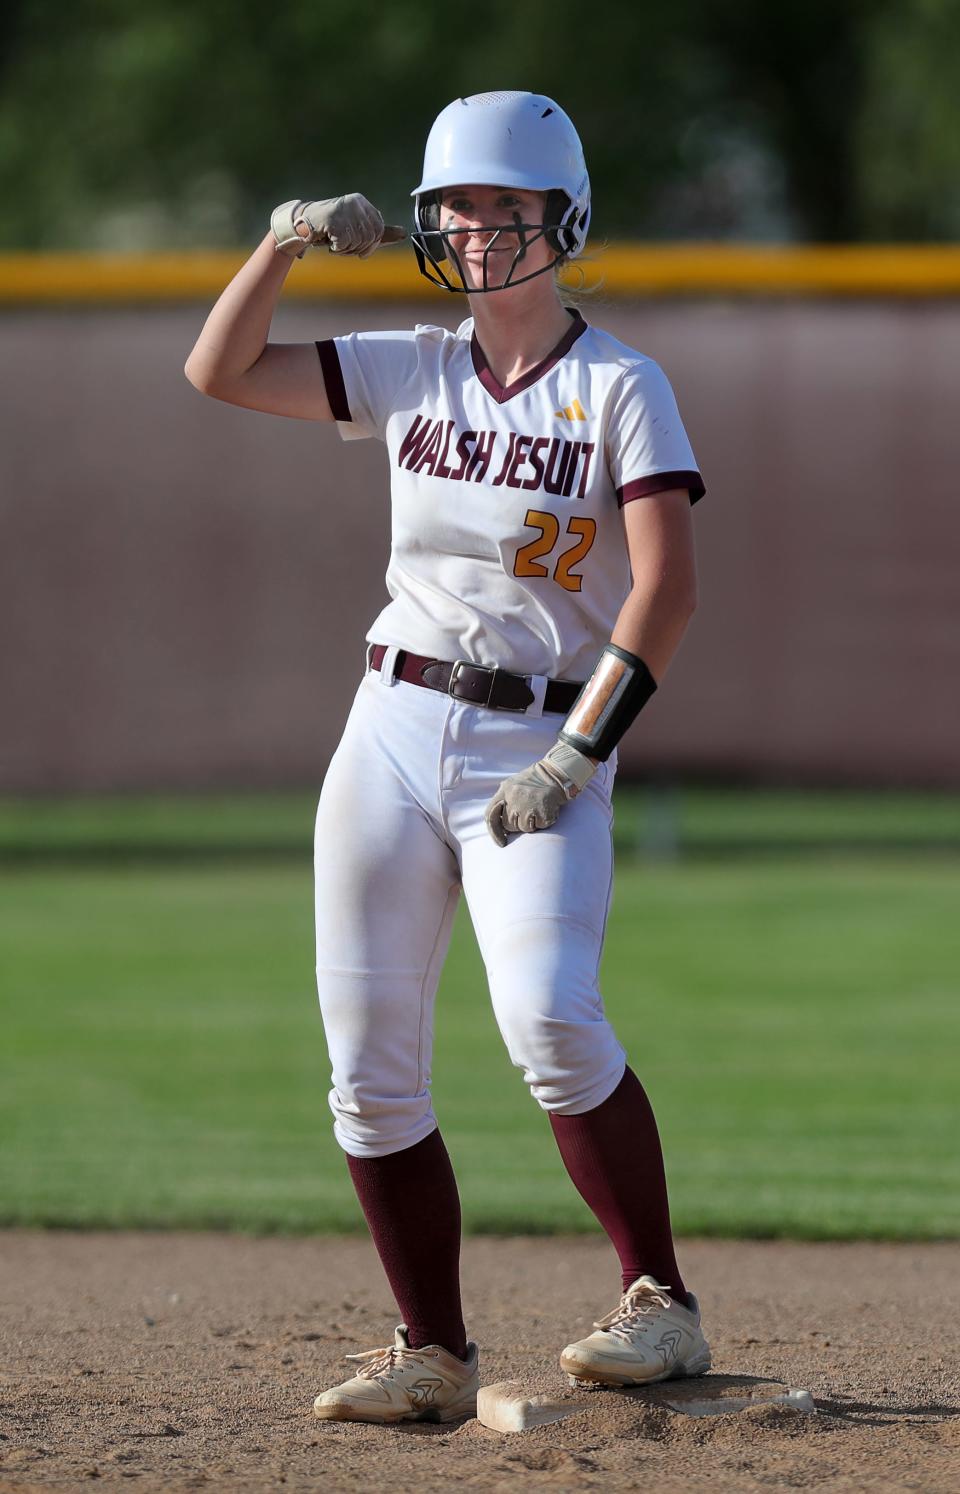 Walsh Jesuit's Caleigh Shaulis leads the Warriors in batting average (.597) this season.